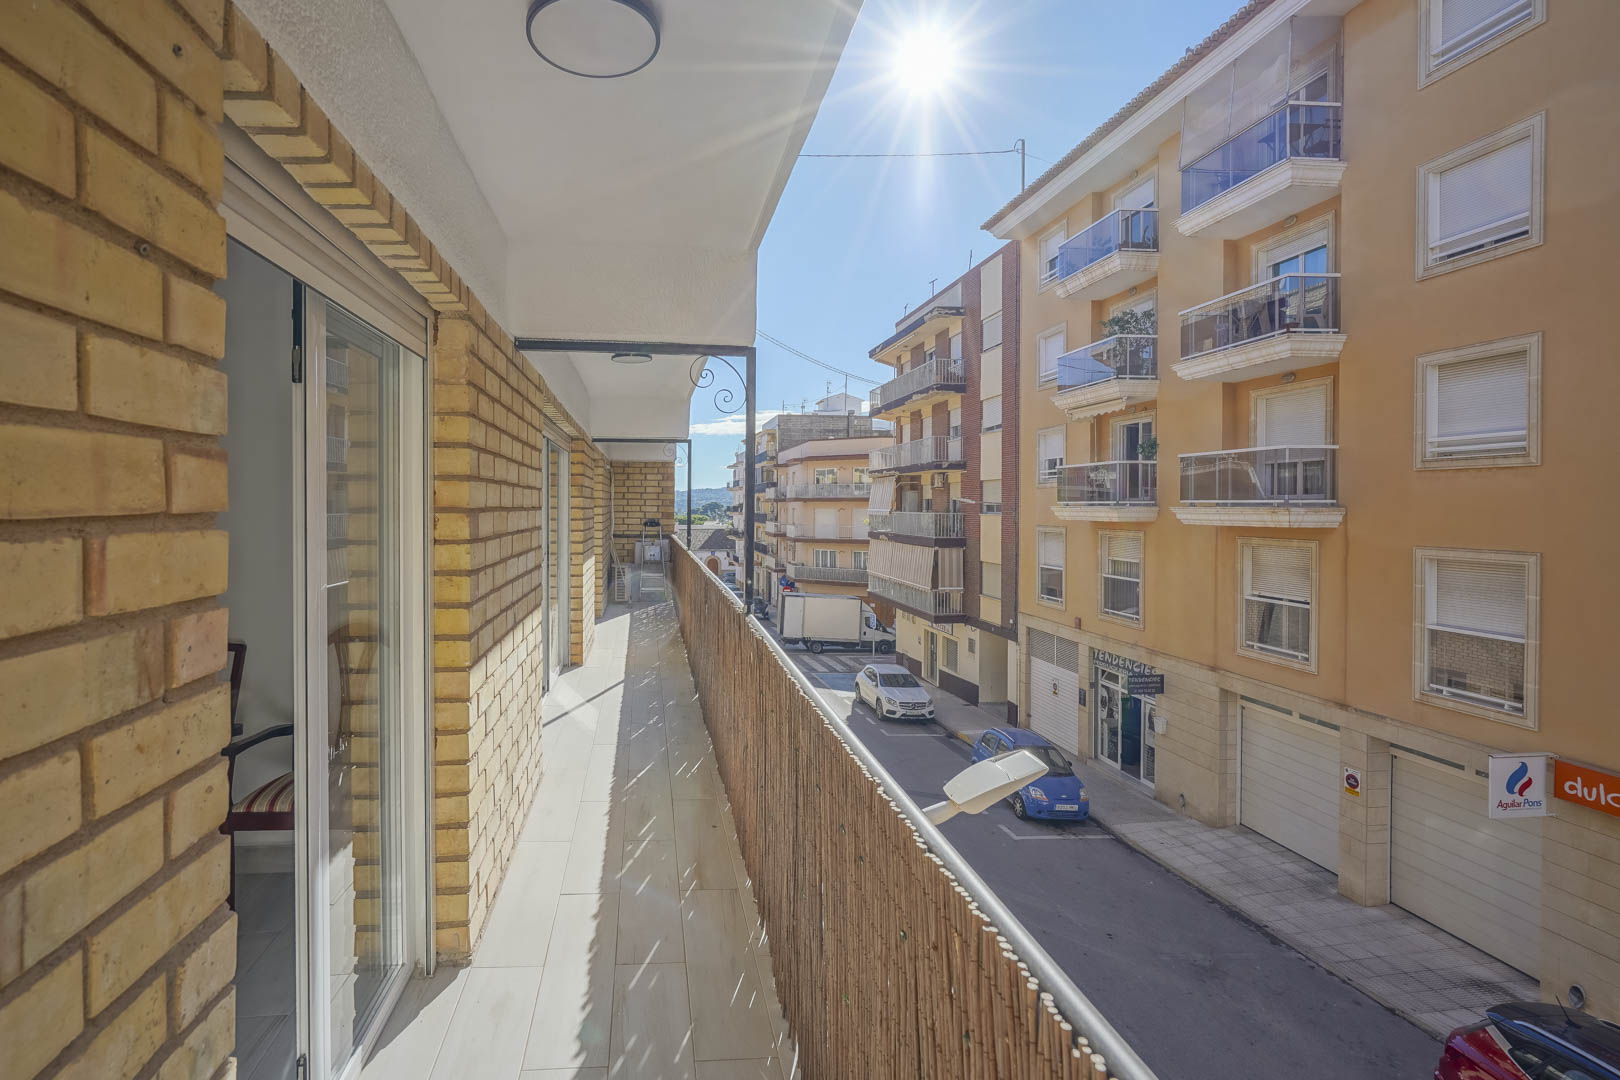 Renovated apartment in the center of Javea
bp